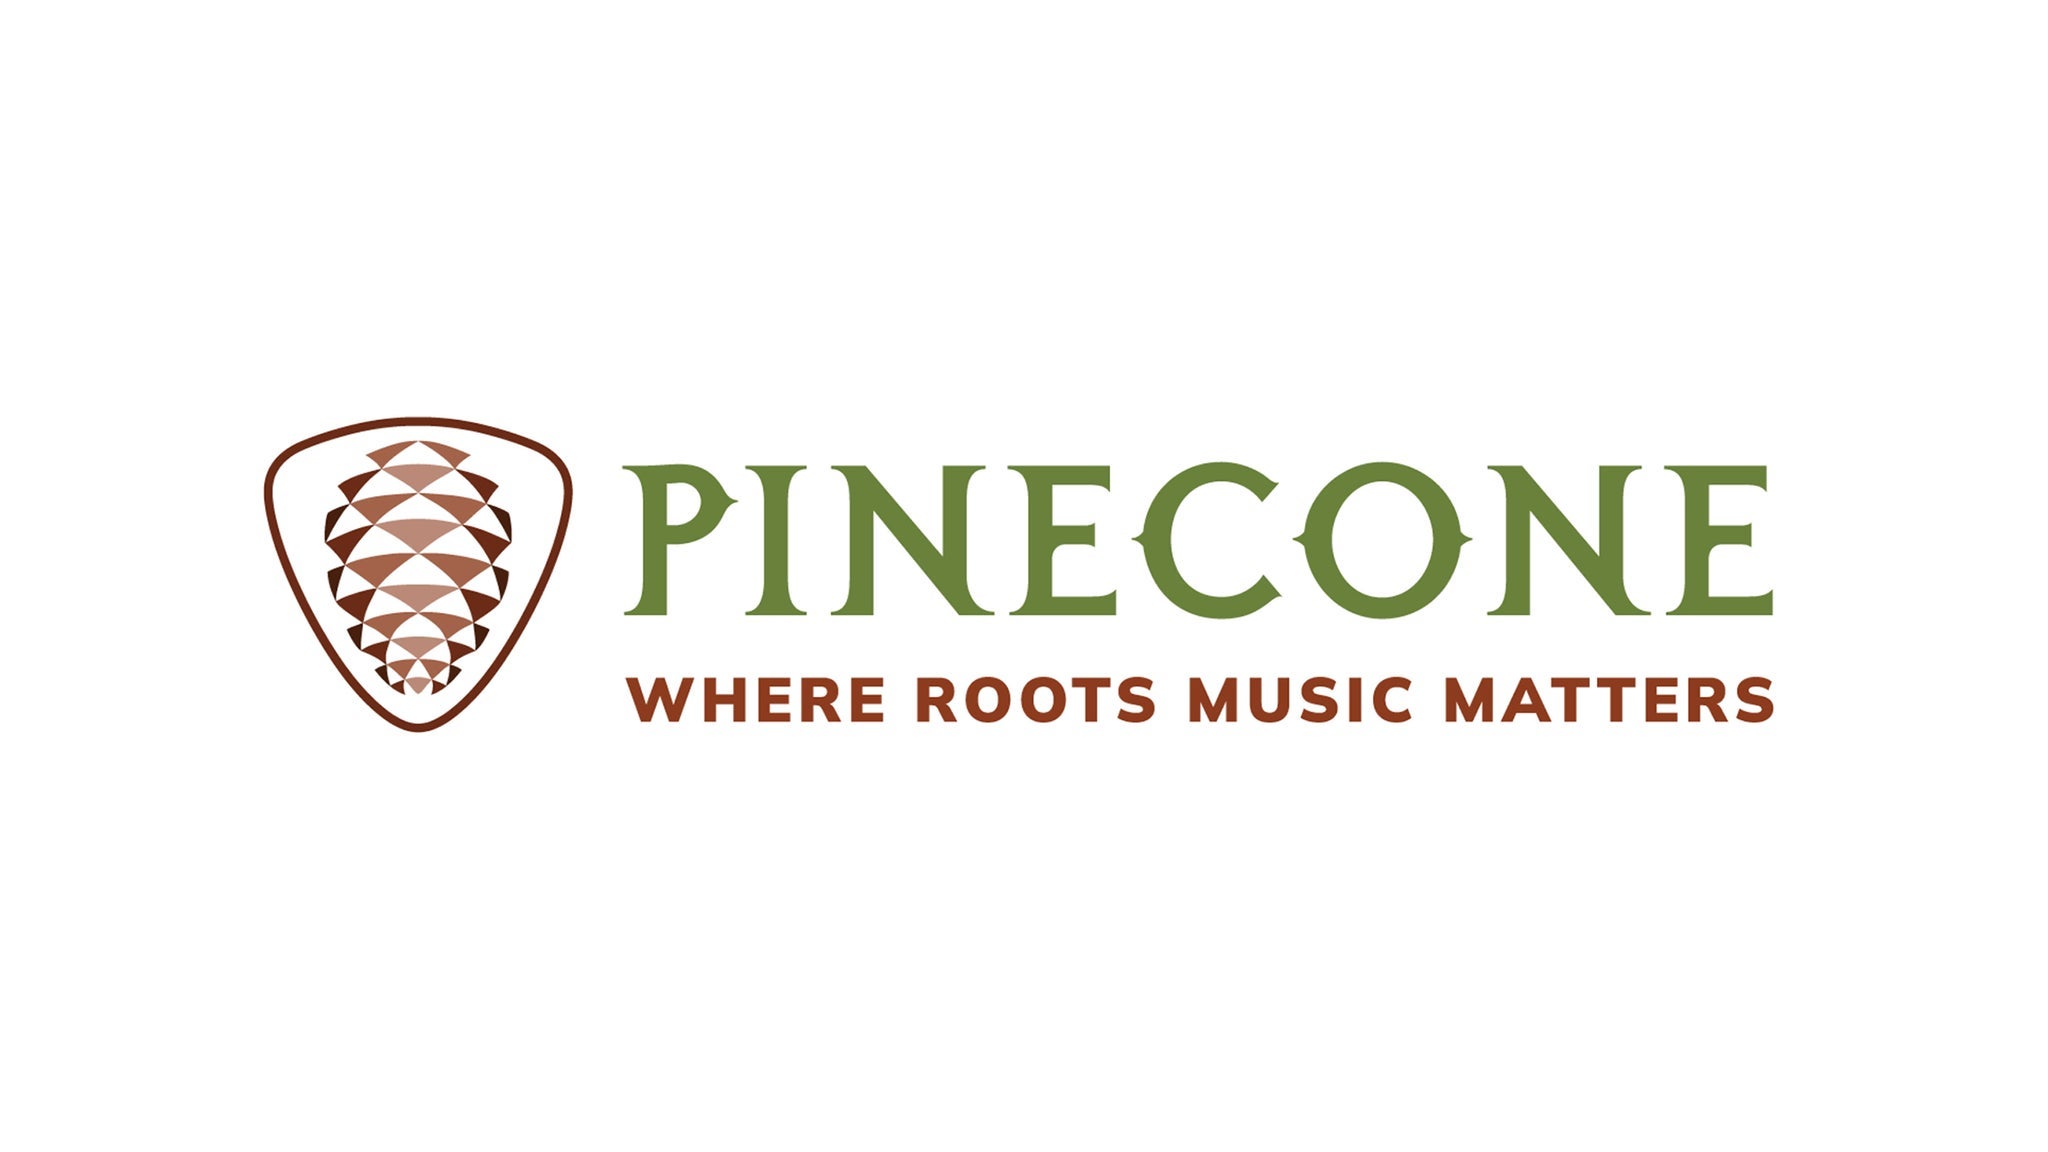 Pinecone: The Kruger Brothers celebrate Doc Watson's 100th Birthday presale code for advance tickets in Raleigh